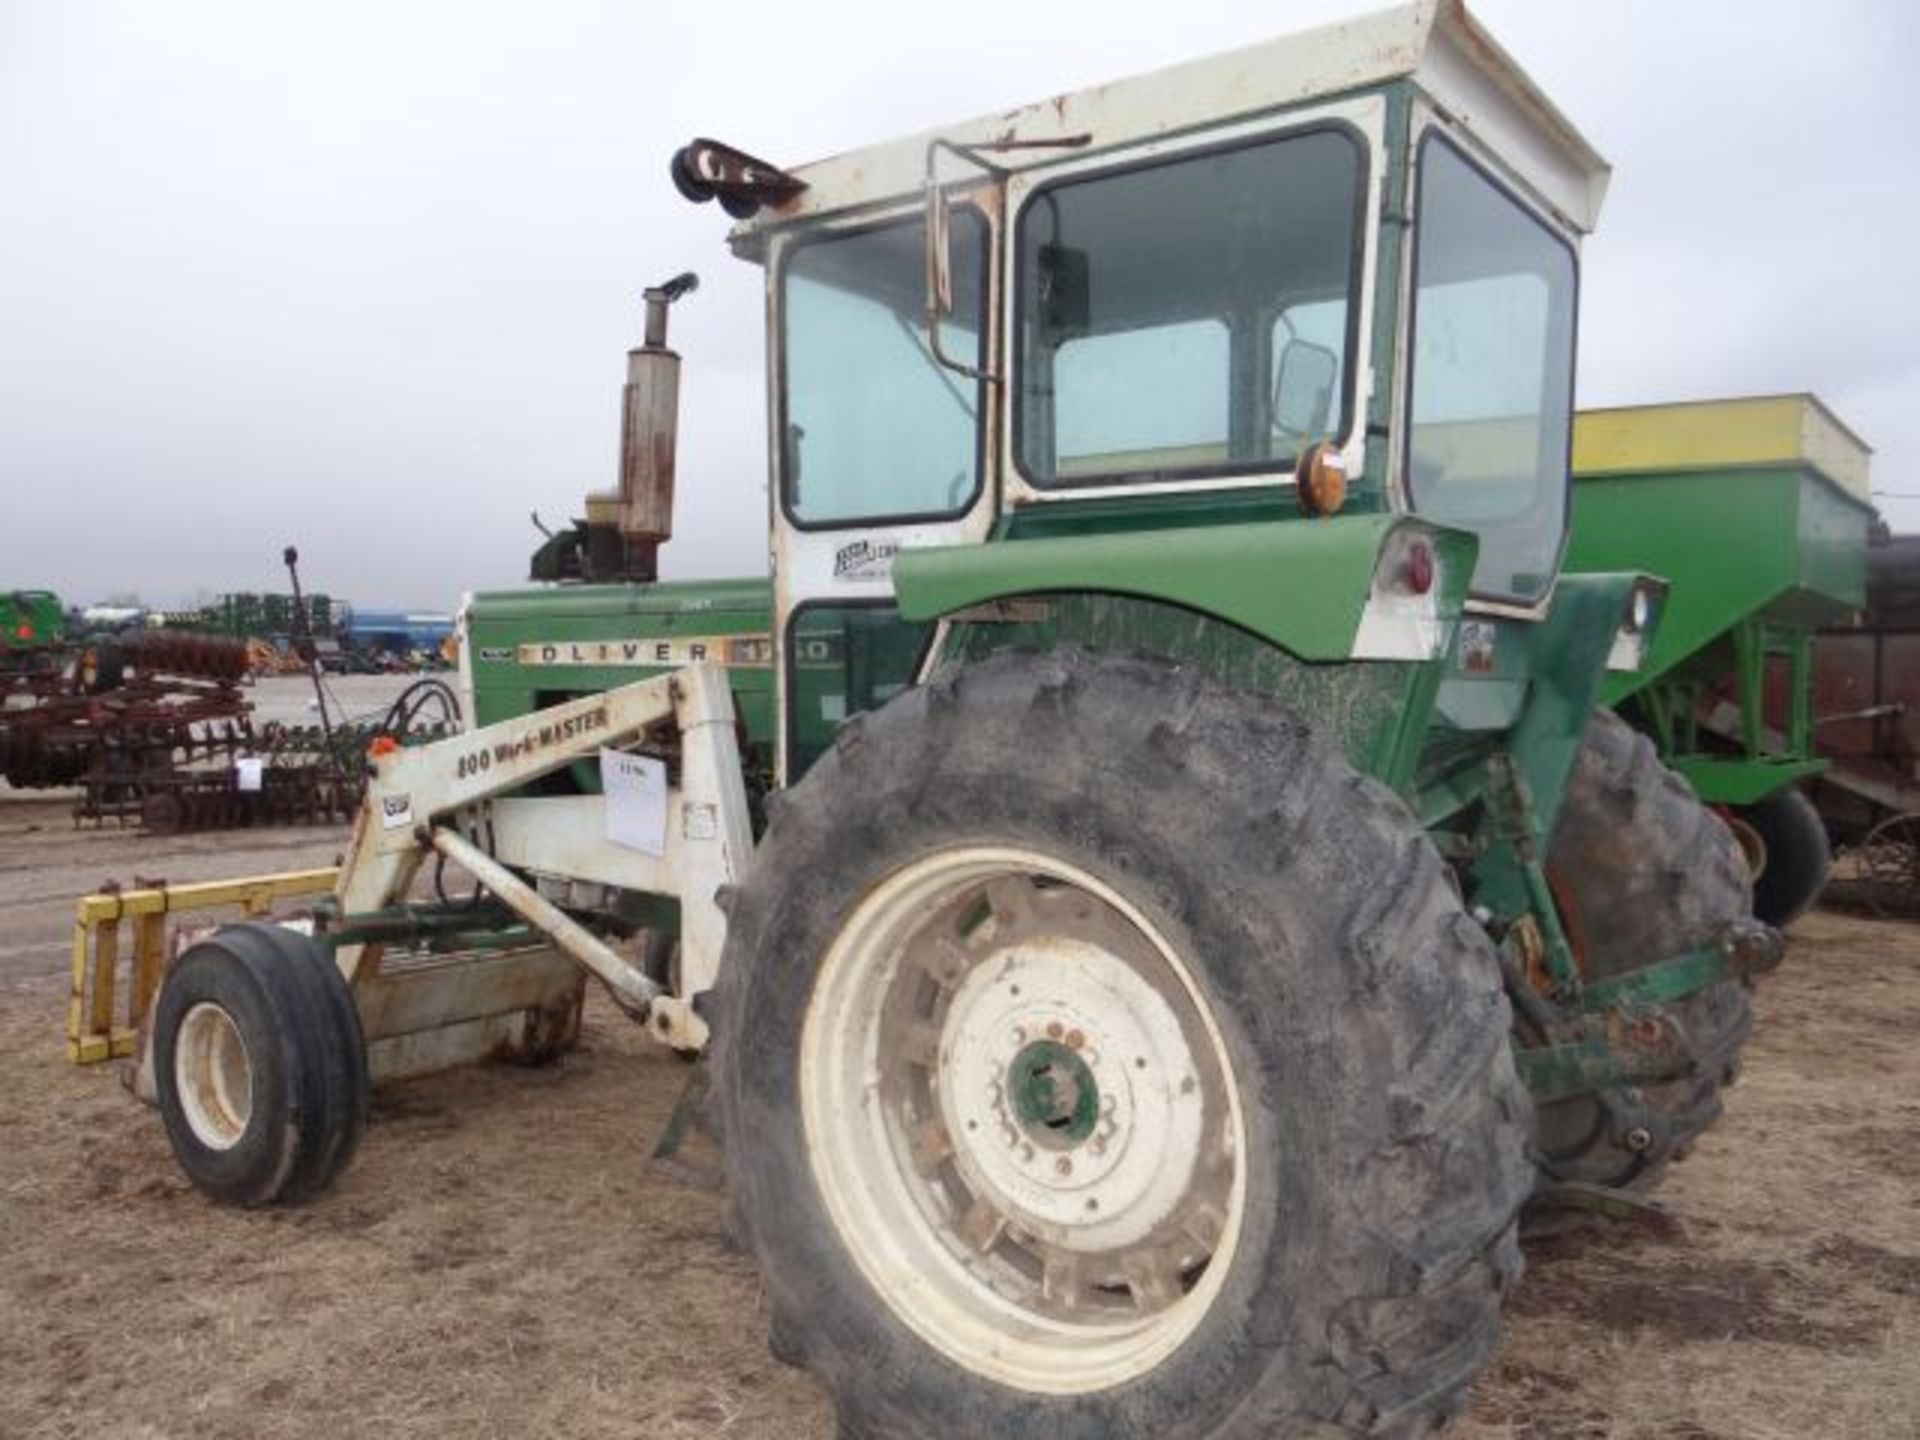 Oliver 1750 Tractor, 1969 w/ 800 Workmaster Loader & Bucket, Gas, Good Tires, Runs Good - Image 5 of 7